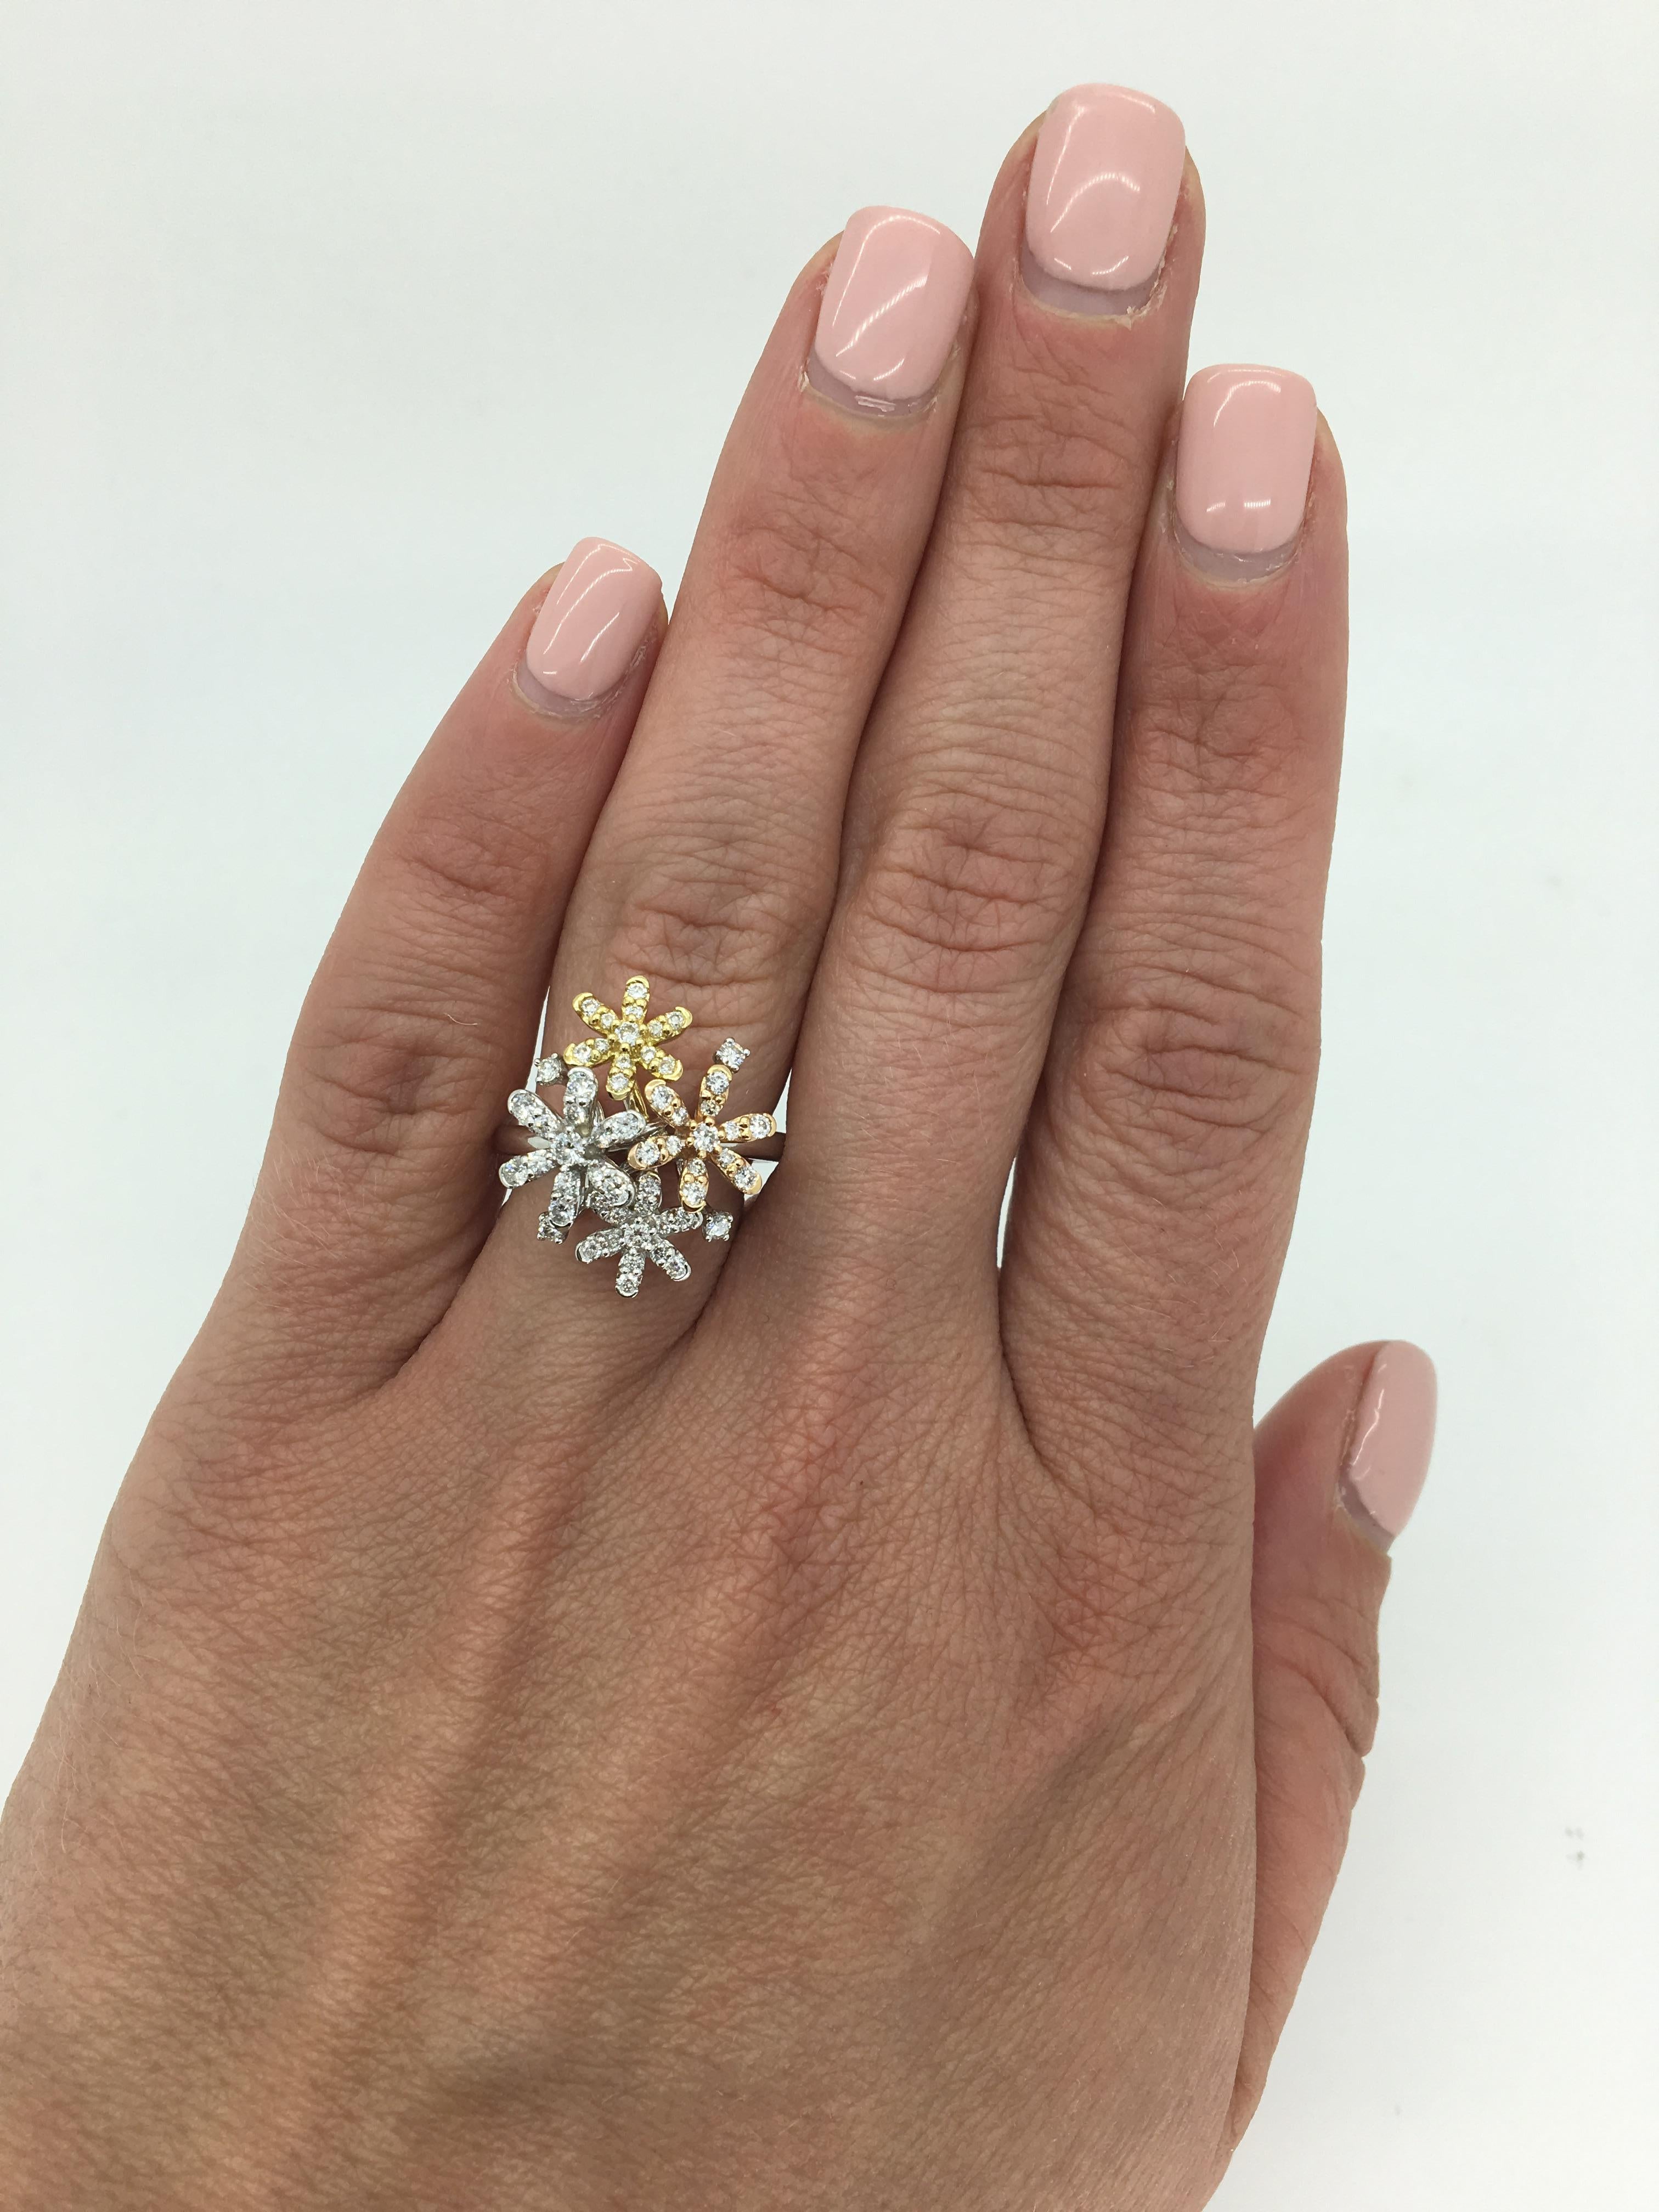 This unique ring is made up of 18K white, yellow and rose gold clusters that are adorned with Round Brilliant Cut Diamonds.

Gemstone: Diamond
Diamond Carat Weight: .61ctw
Diamond Cut: Round Brilliant Cut
Color: G-J
Clarity: Average VS
Metal: 18 Tri